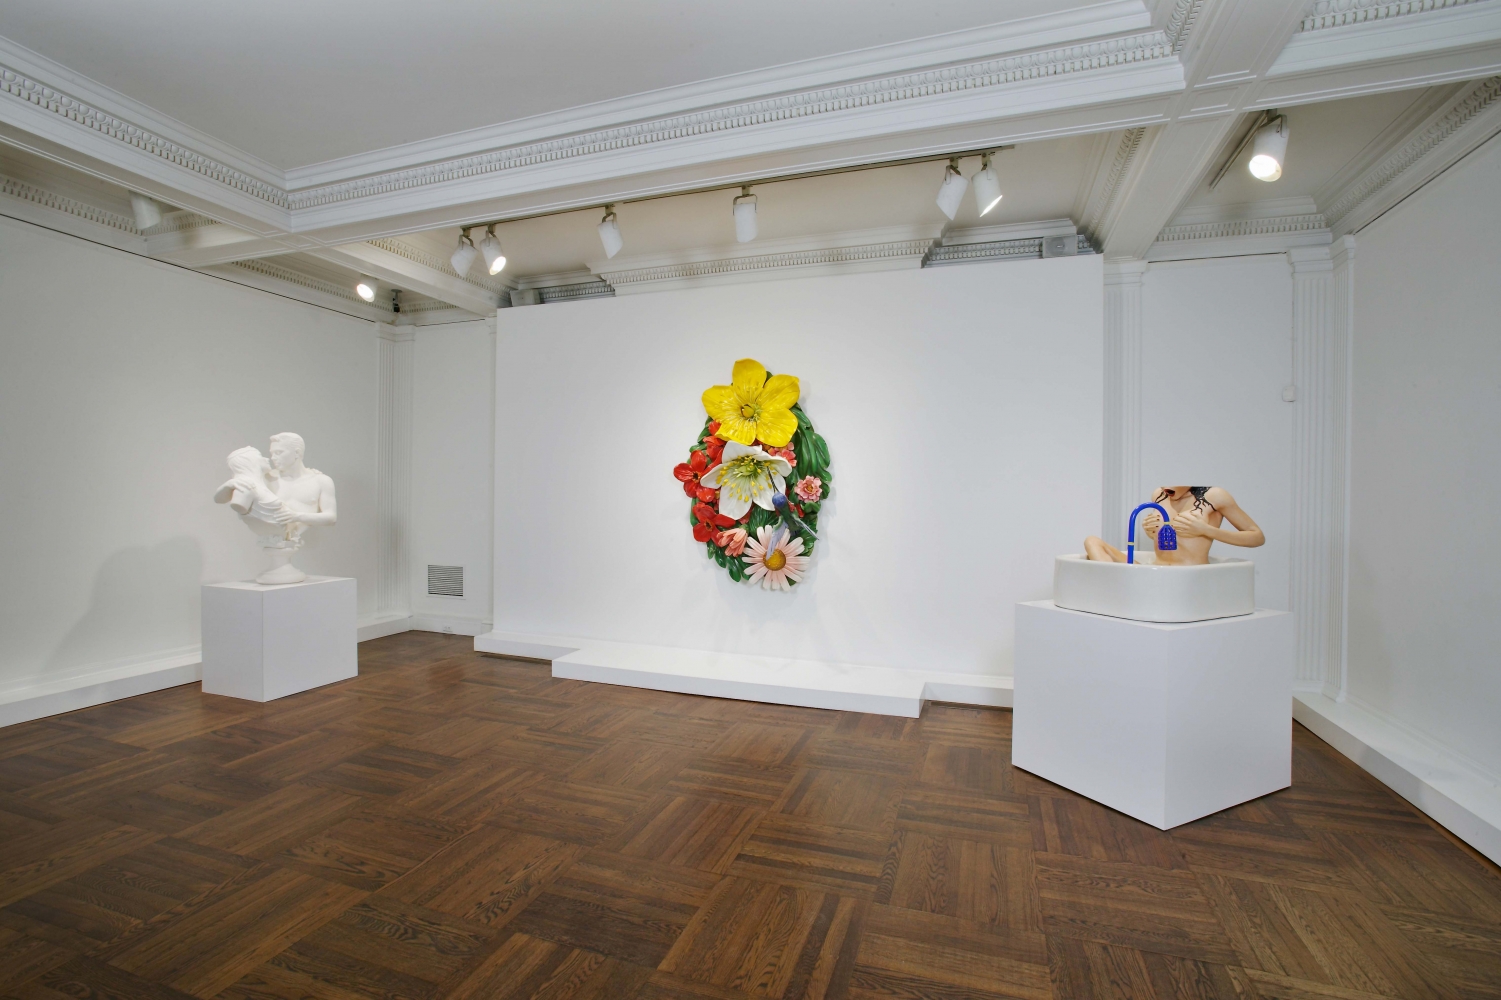 Installation view of Jeff Koons: Highlights of 25 Years&amp;nbsp;at Mnuchin Gallery, April 7 - June 5, 2004. Photography by Tom Powel Imaging.&amp;nbsp;